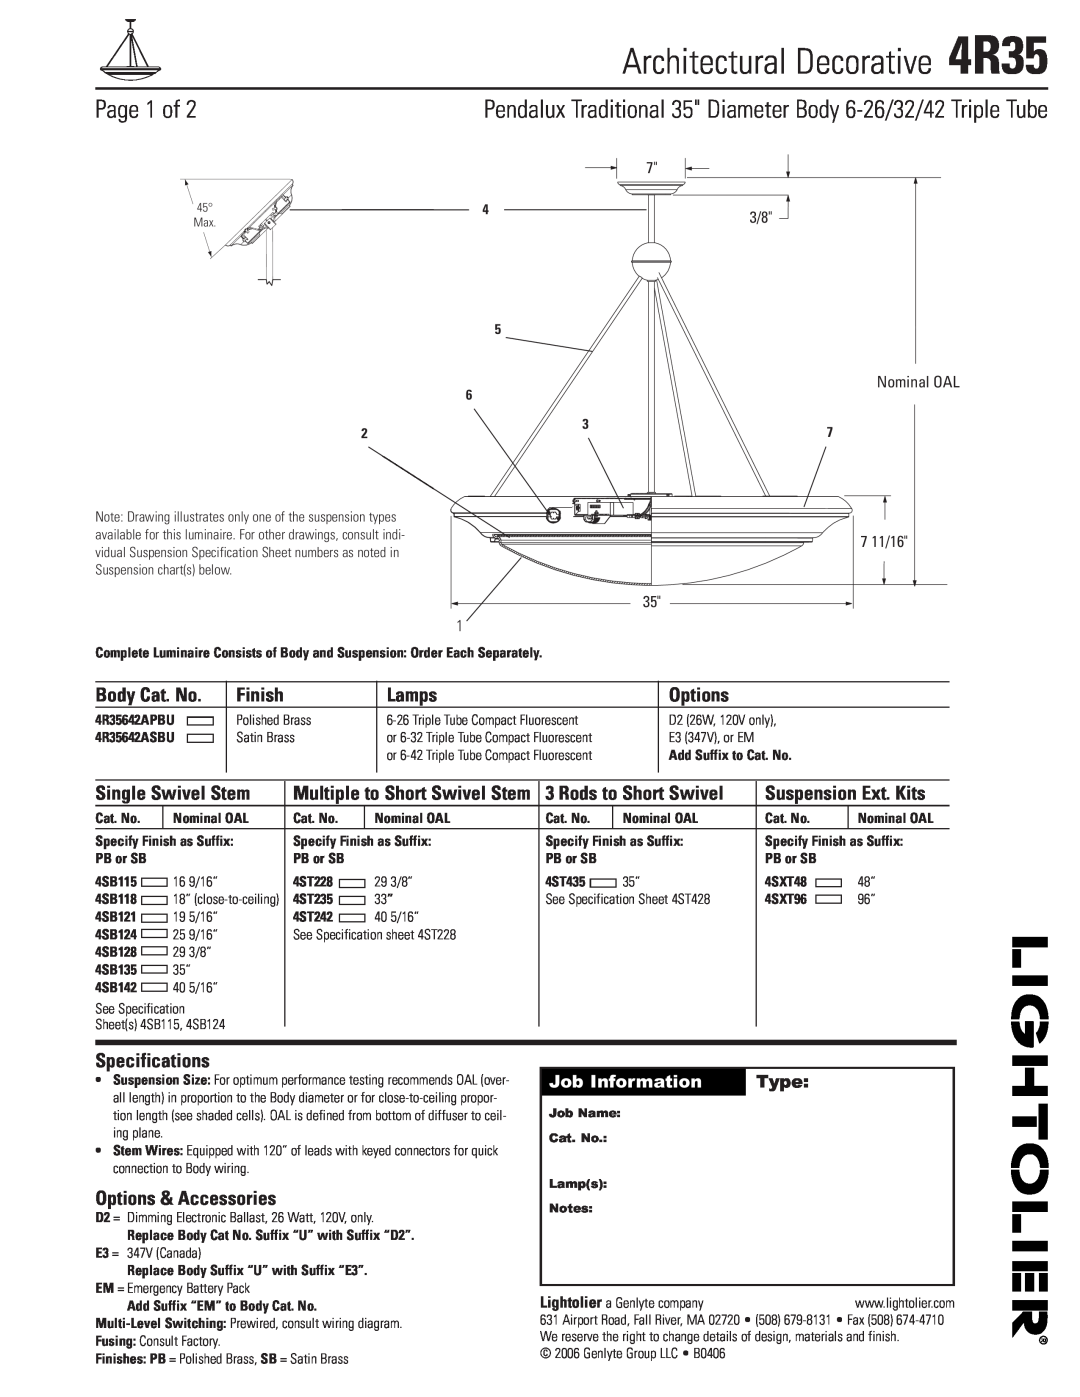 Lightolier specifications Architectural Decorative 4R35, Page 1 of, Body Cat. No, Finish, Lamps, Options, Type, 7 11/16 